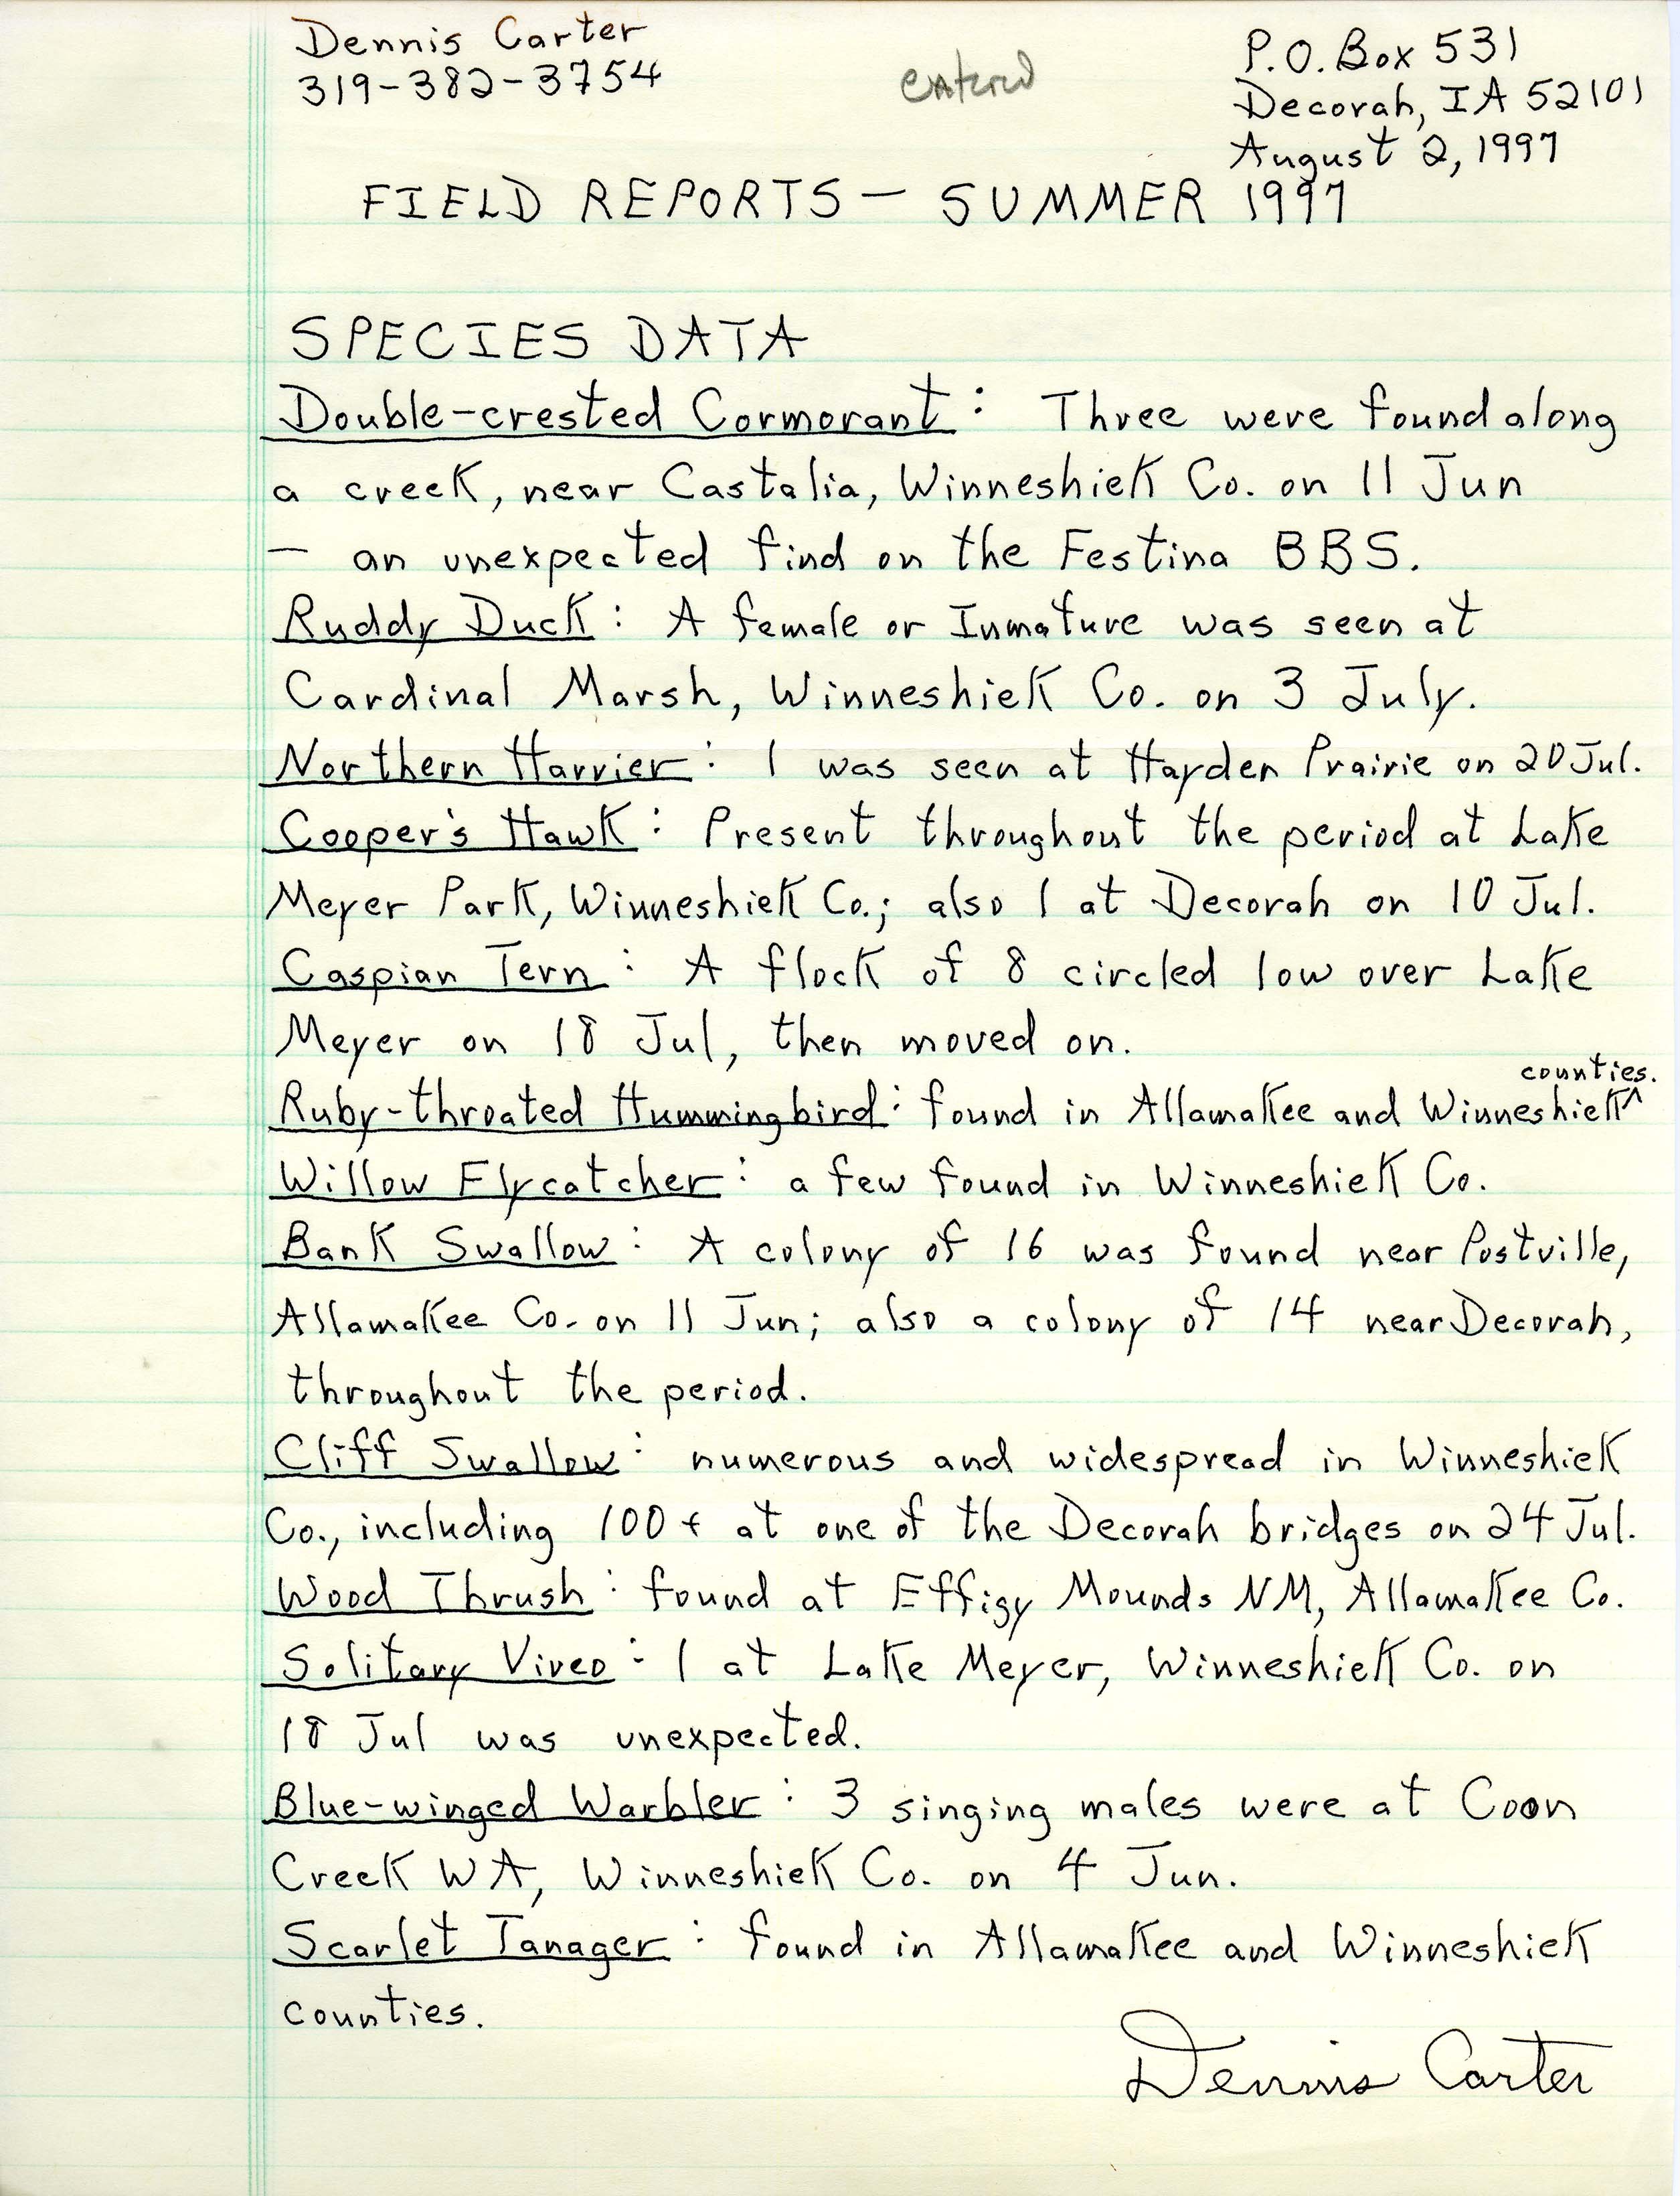 Field notes contributed by Dennis L. Carter, August 2, 1997